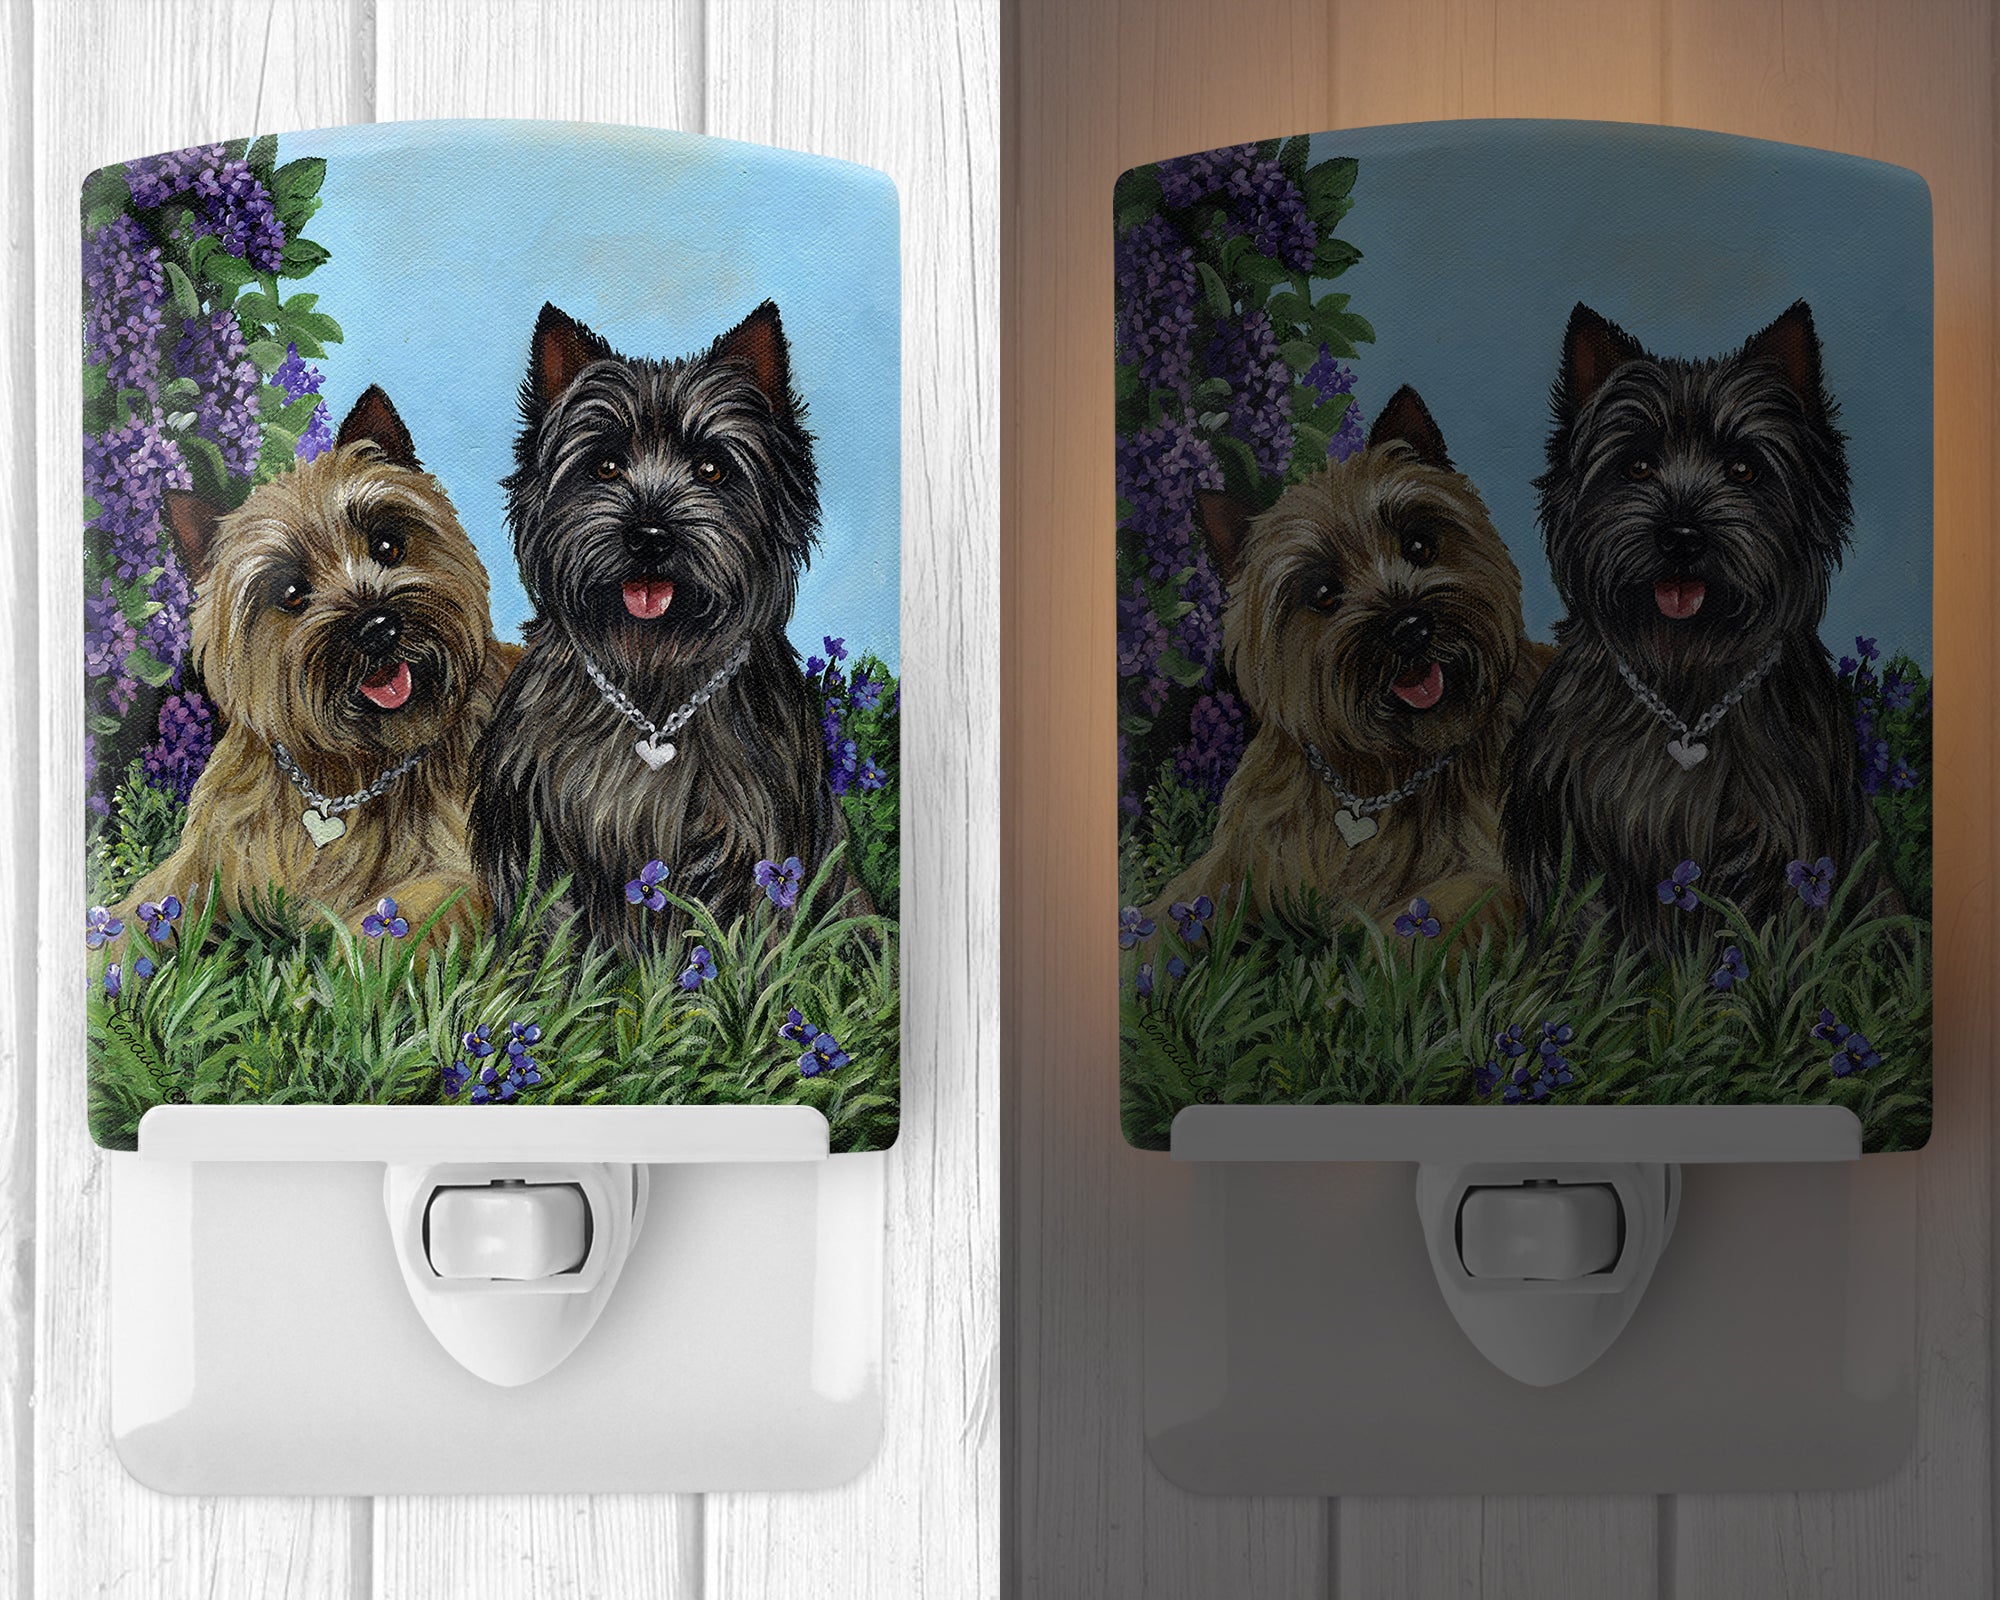 Cairn Terrier Donation Ceramic Night Light PPP3049CNL - the-store.com